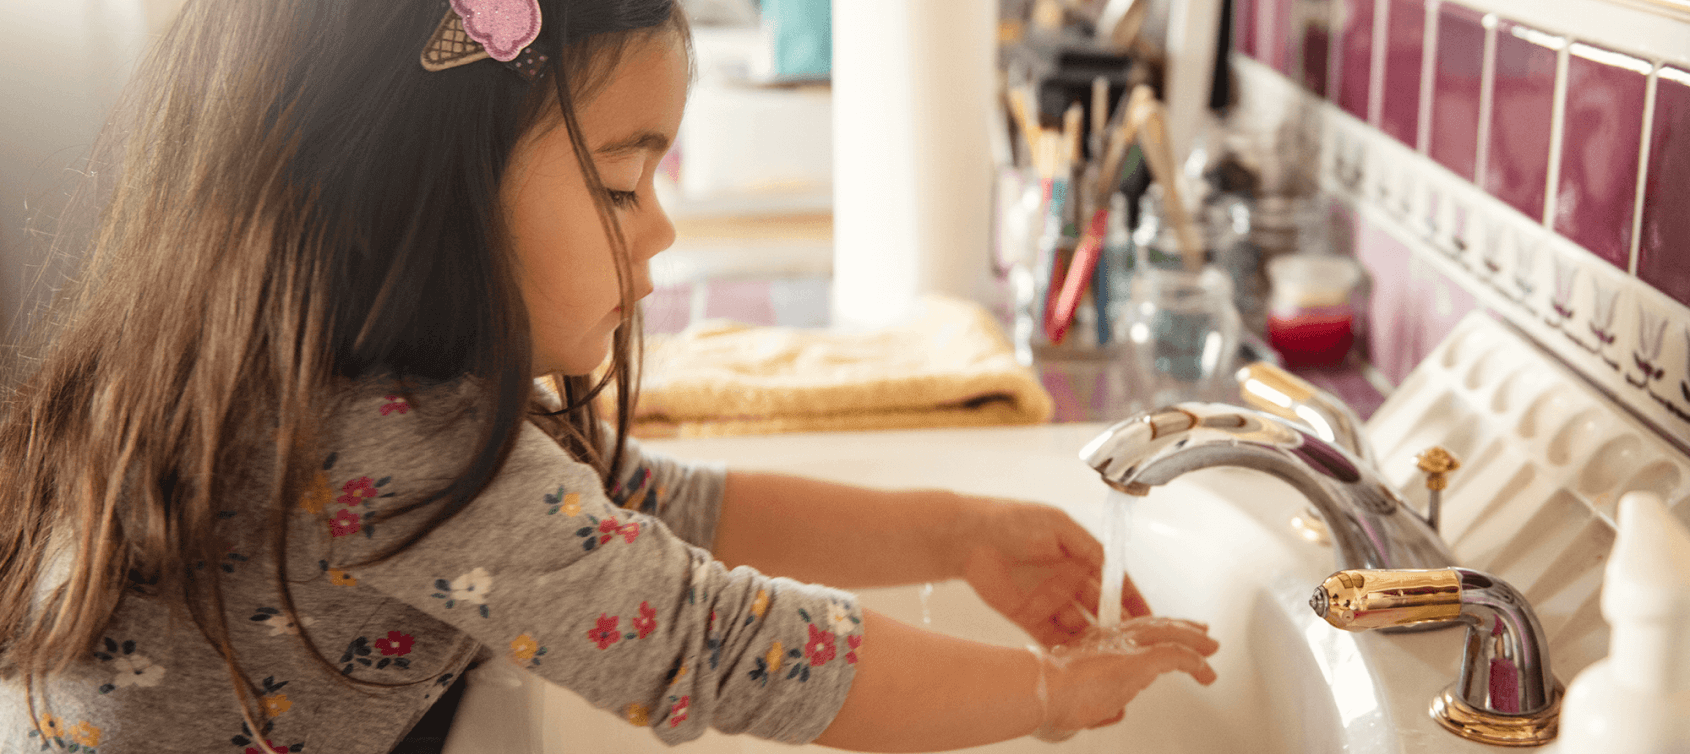 Little girl washing her hands at the sink